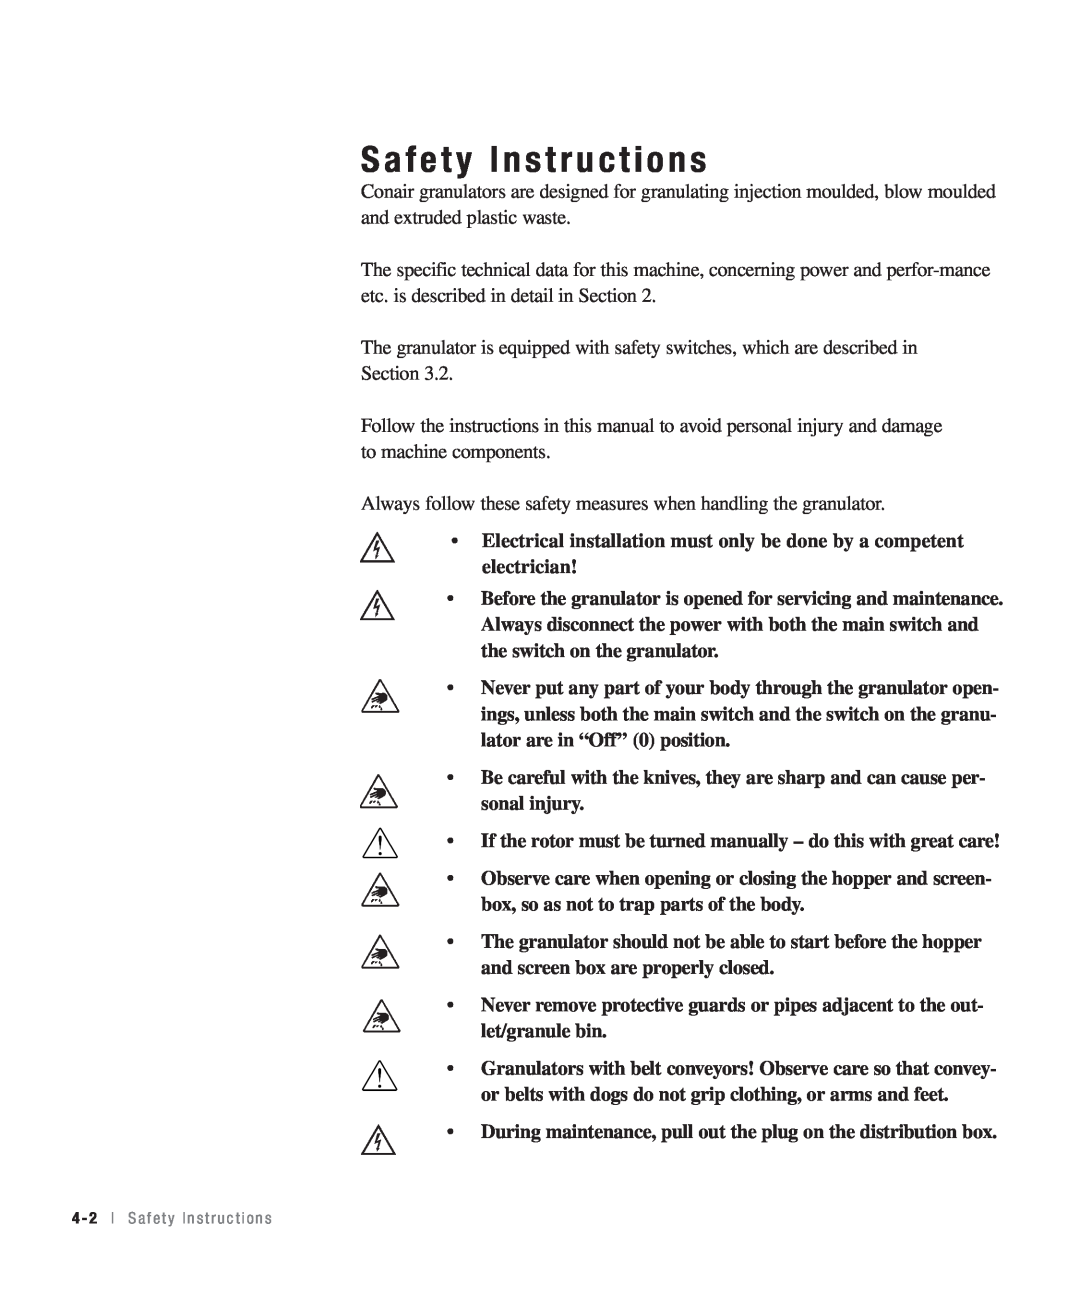 Conair CHS-810 manual Safety Instructions, Electrical installation must only be done by a competent electrician 